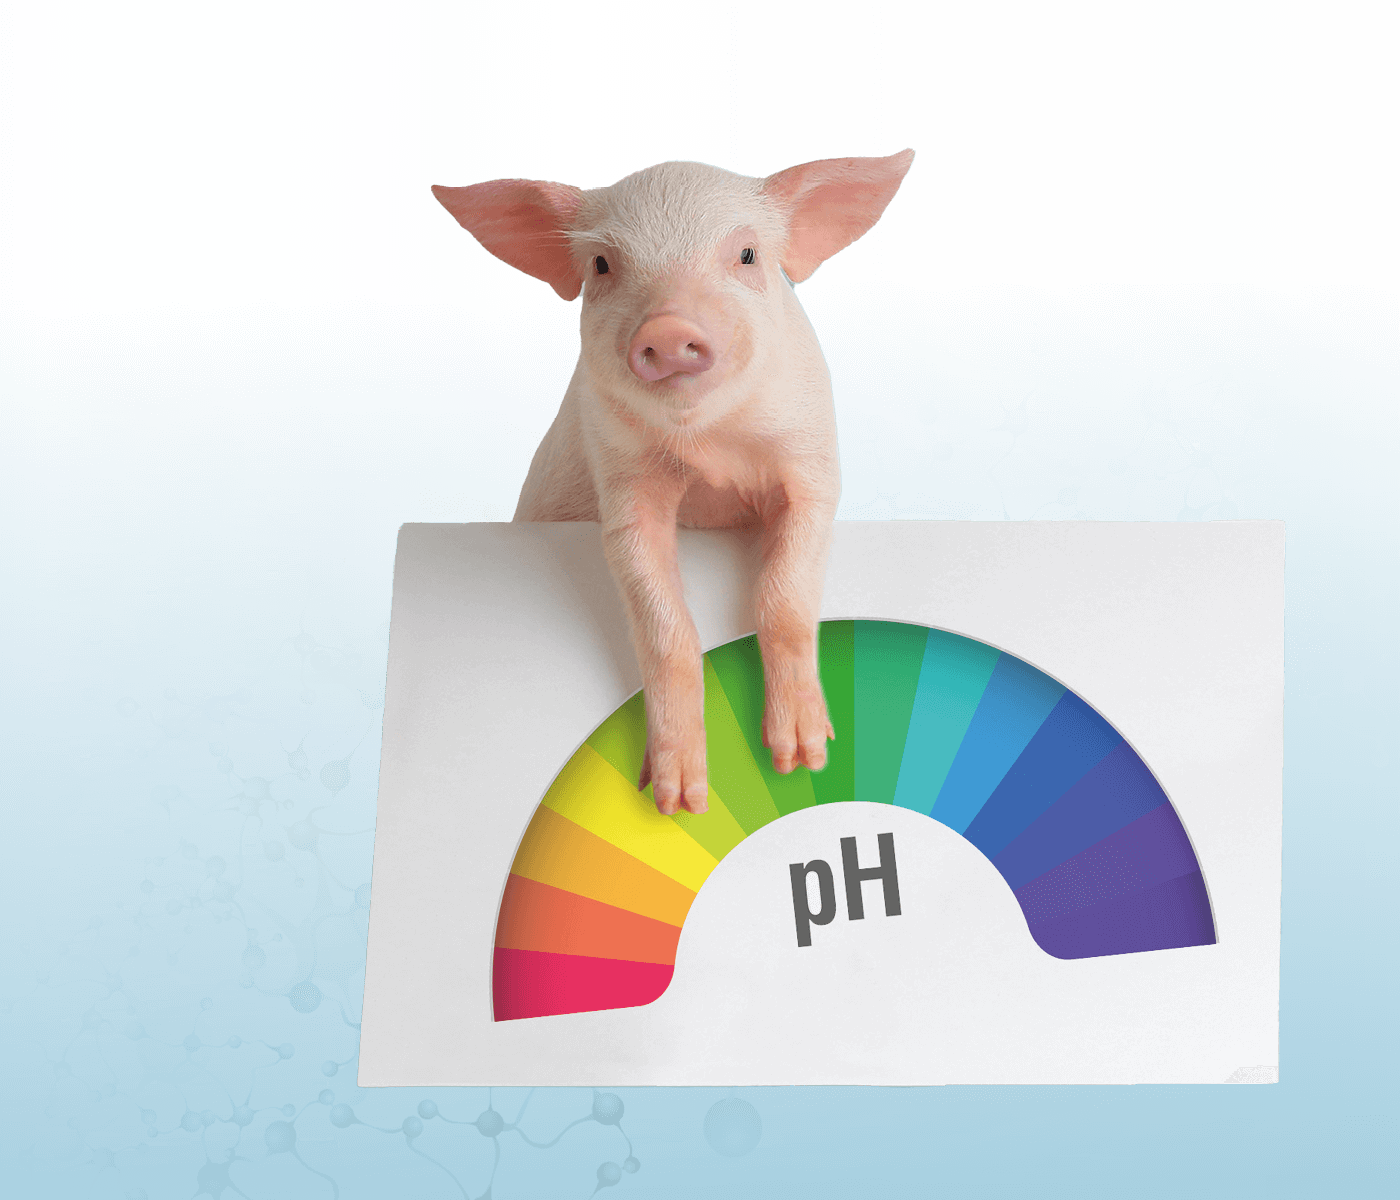 The role of acidifiers in piglet gut health